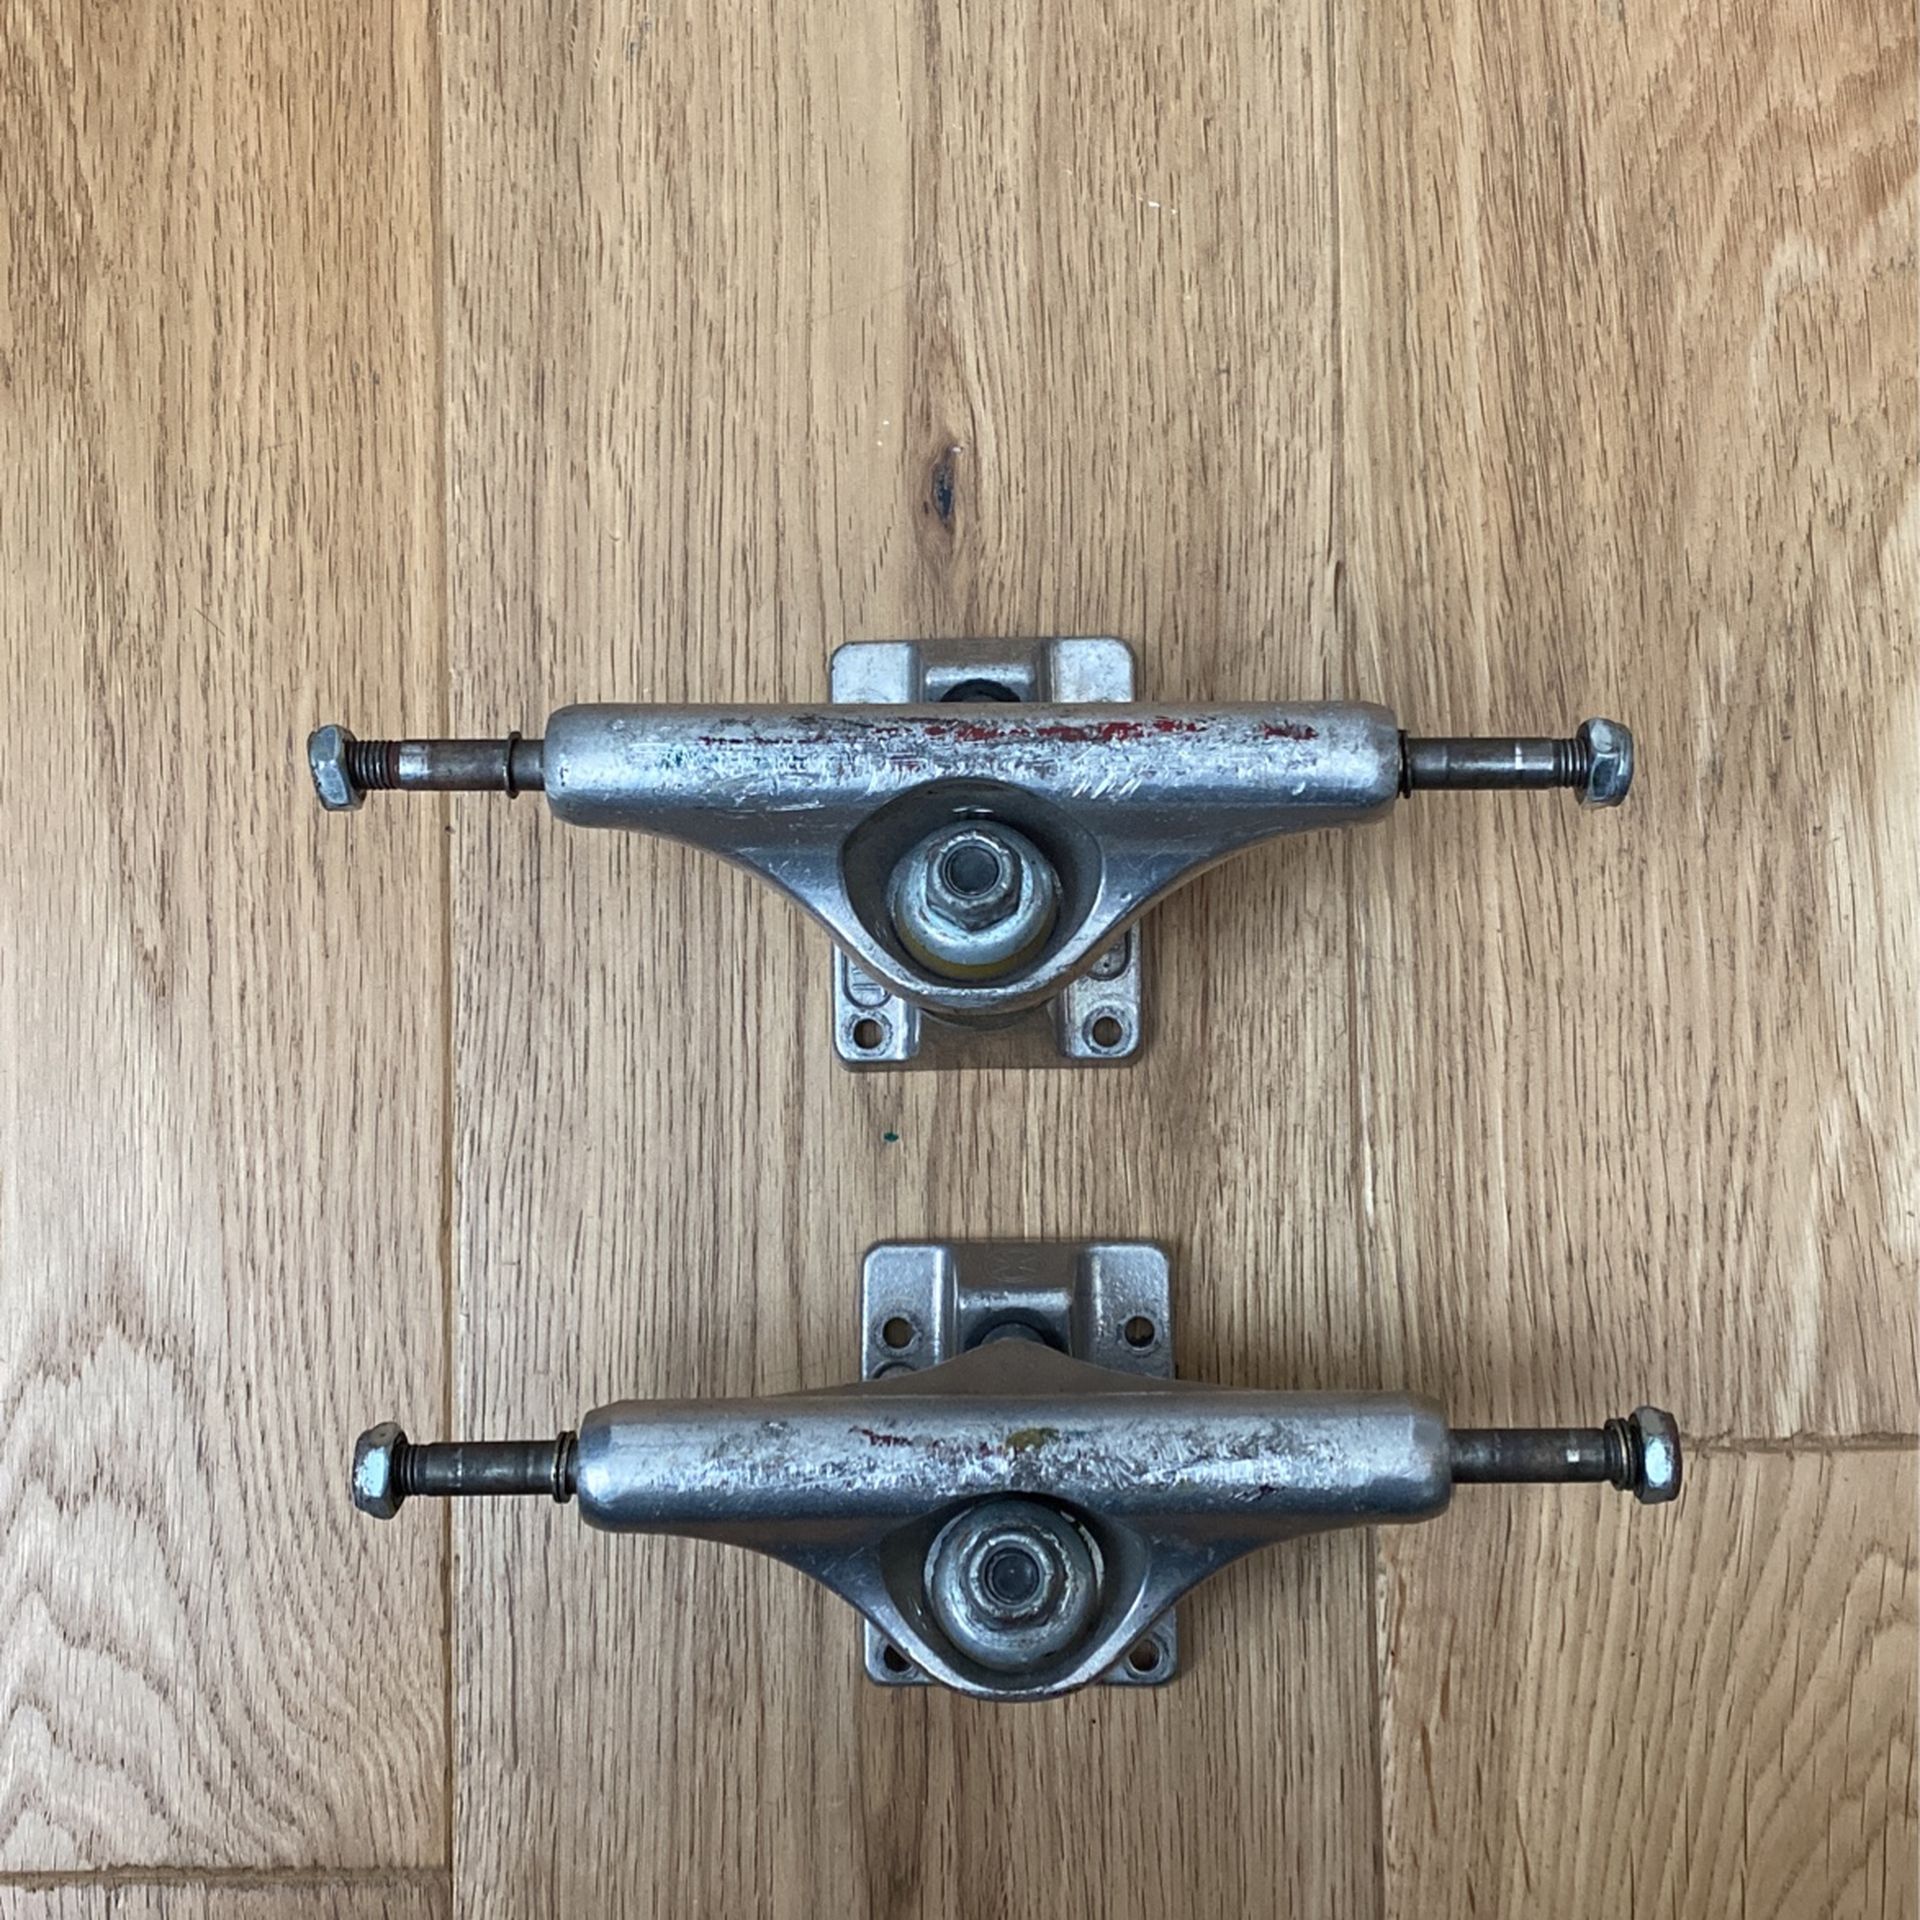 Trucks and Wheels Sold Separately – Skate and Annoy